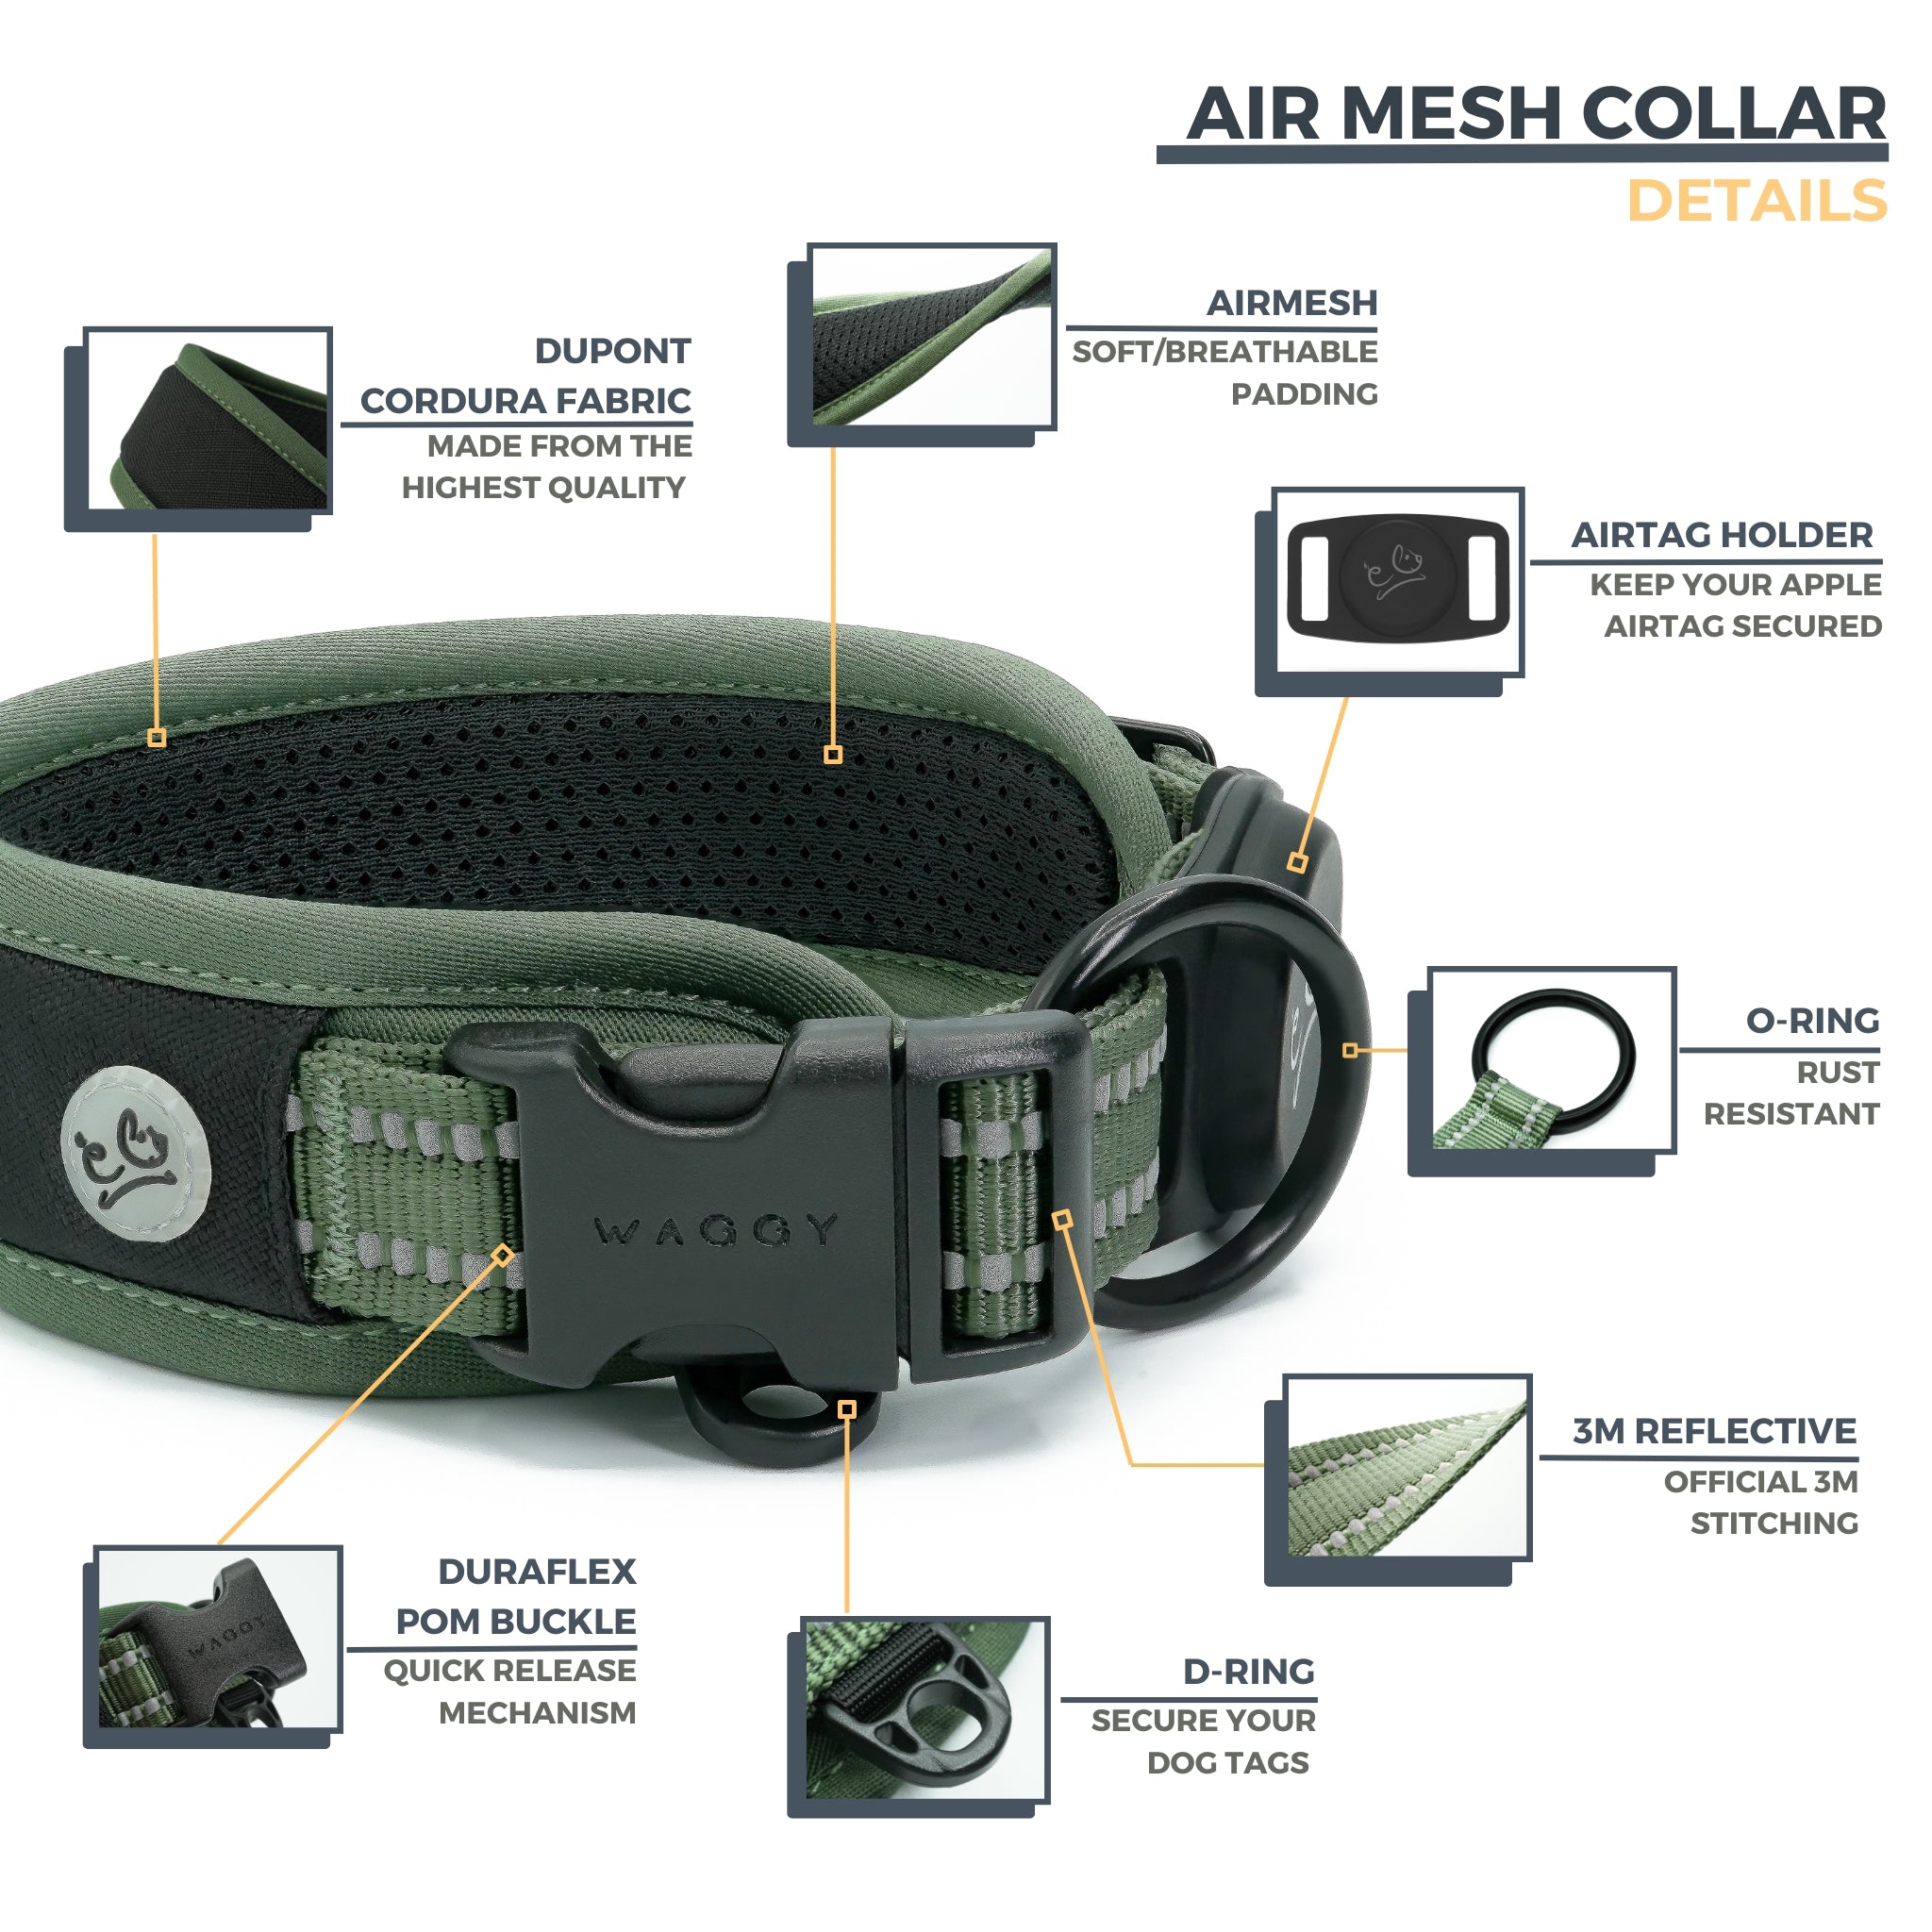 7 features & details regarding Green Air Mesh dog collar. Dupont Cordura Fabric; Air Mesh padding; Airtag Holder; Duraflex buckle; D-ring; O-ring; 3M Reflective stitching with short description and close up images.